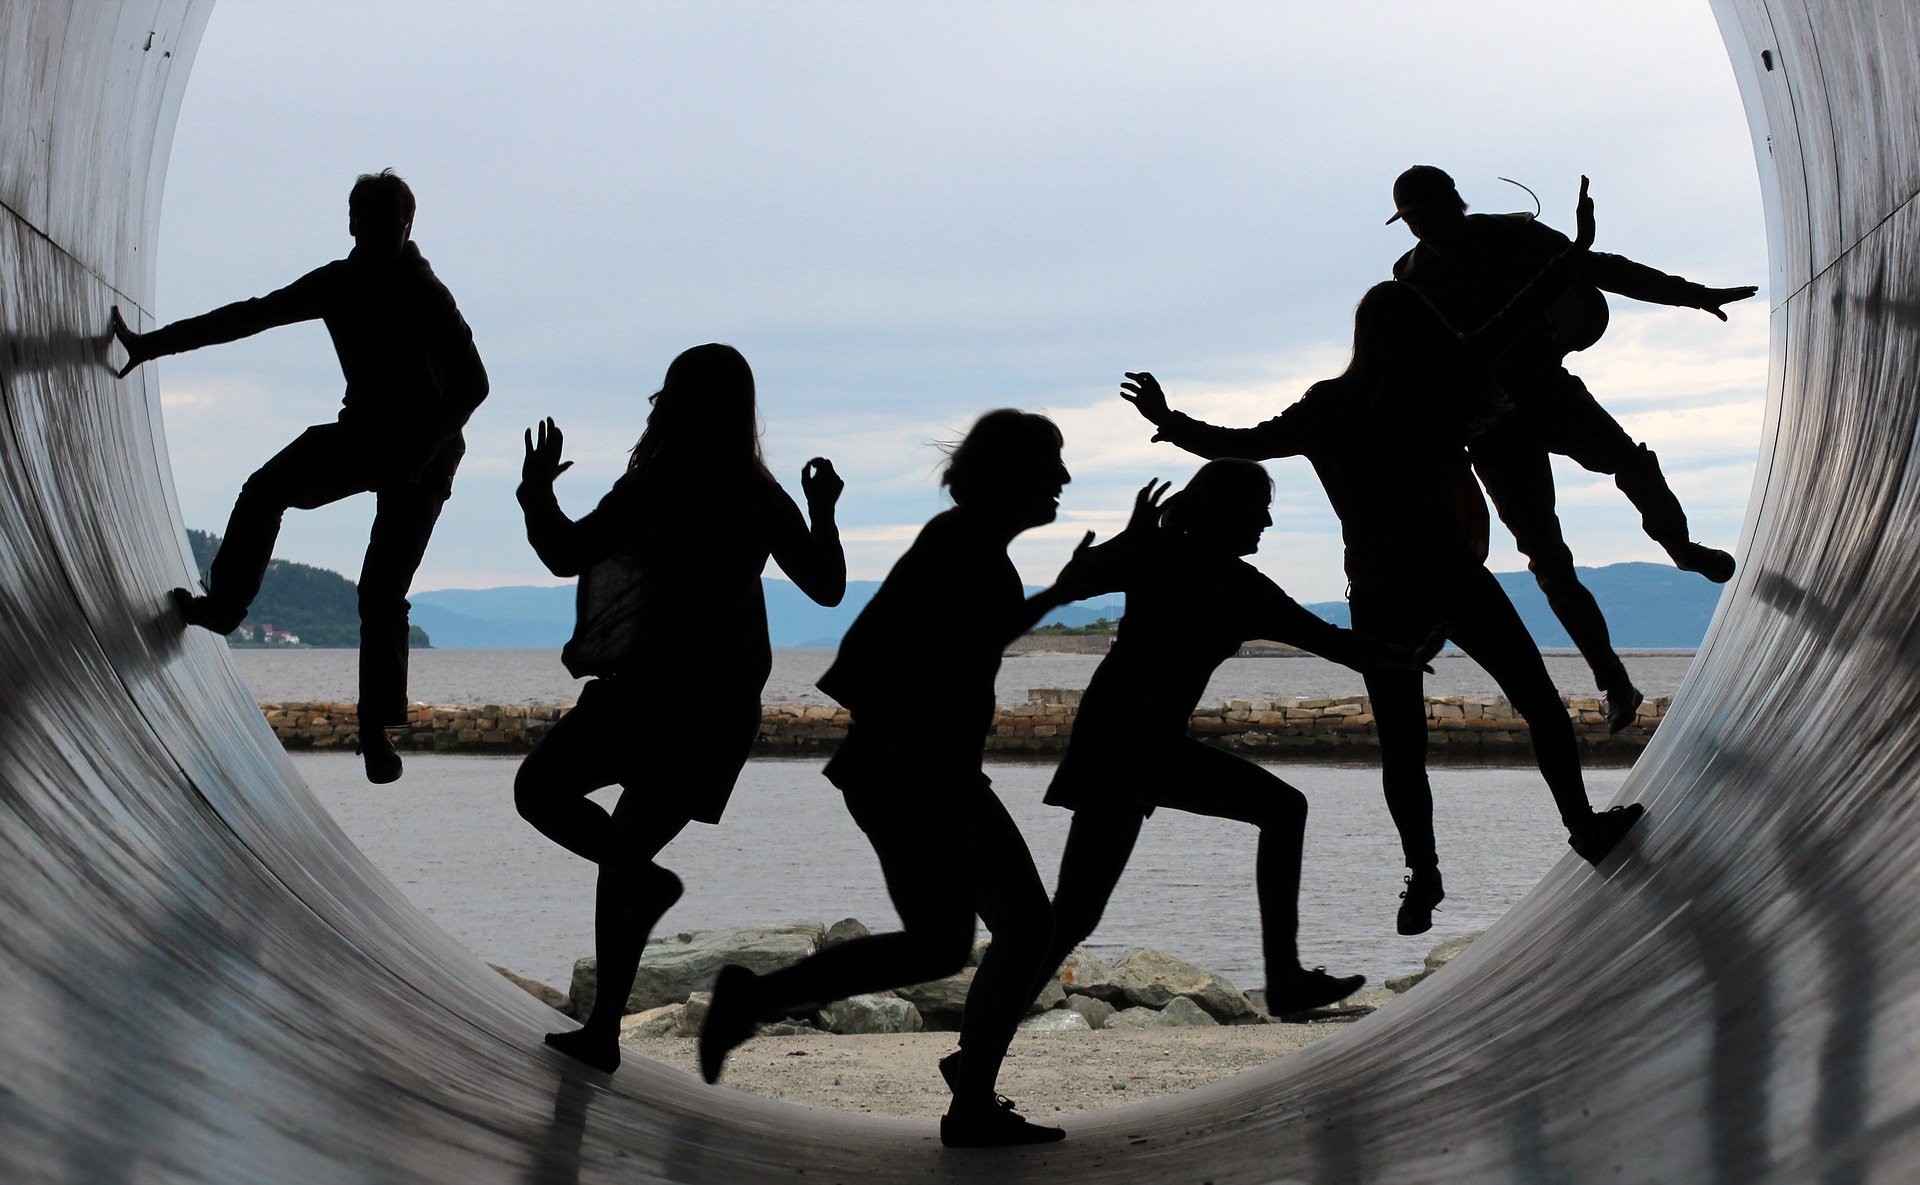 Meet the Team. Silhouettes of adults running on a large concrete tube or half pipe with water in background